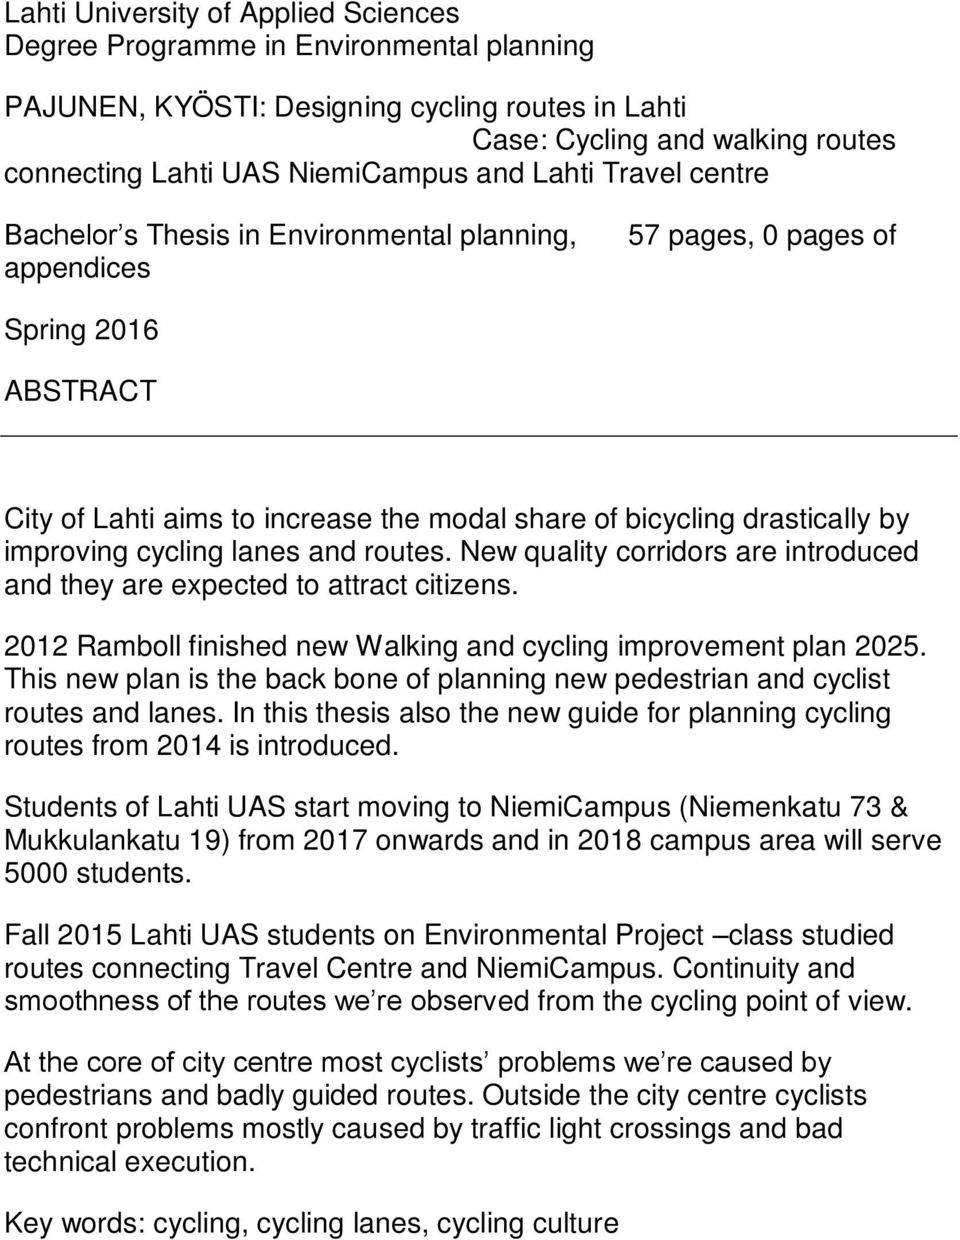 improving cycling lanes and routes. New quality corridors are introduced and they are expected to attract citizens. 2012 Ramboll finished new Walking and cycling improvement plan 2025.